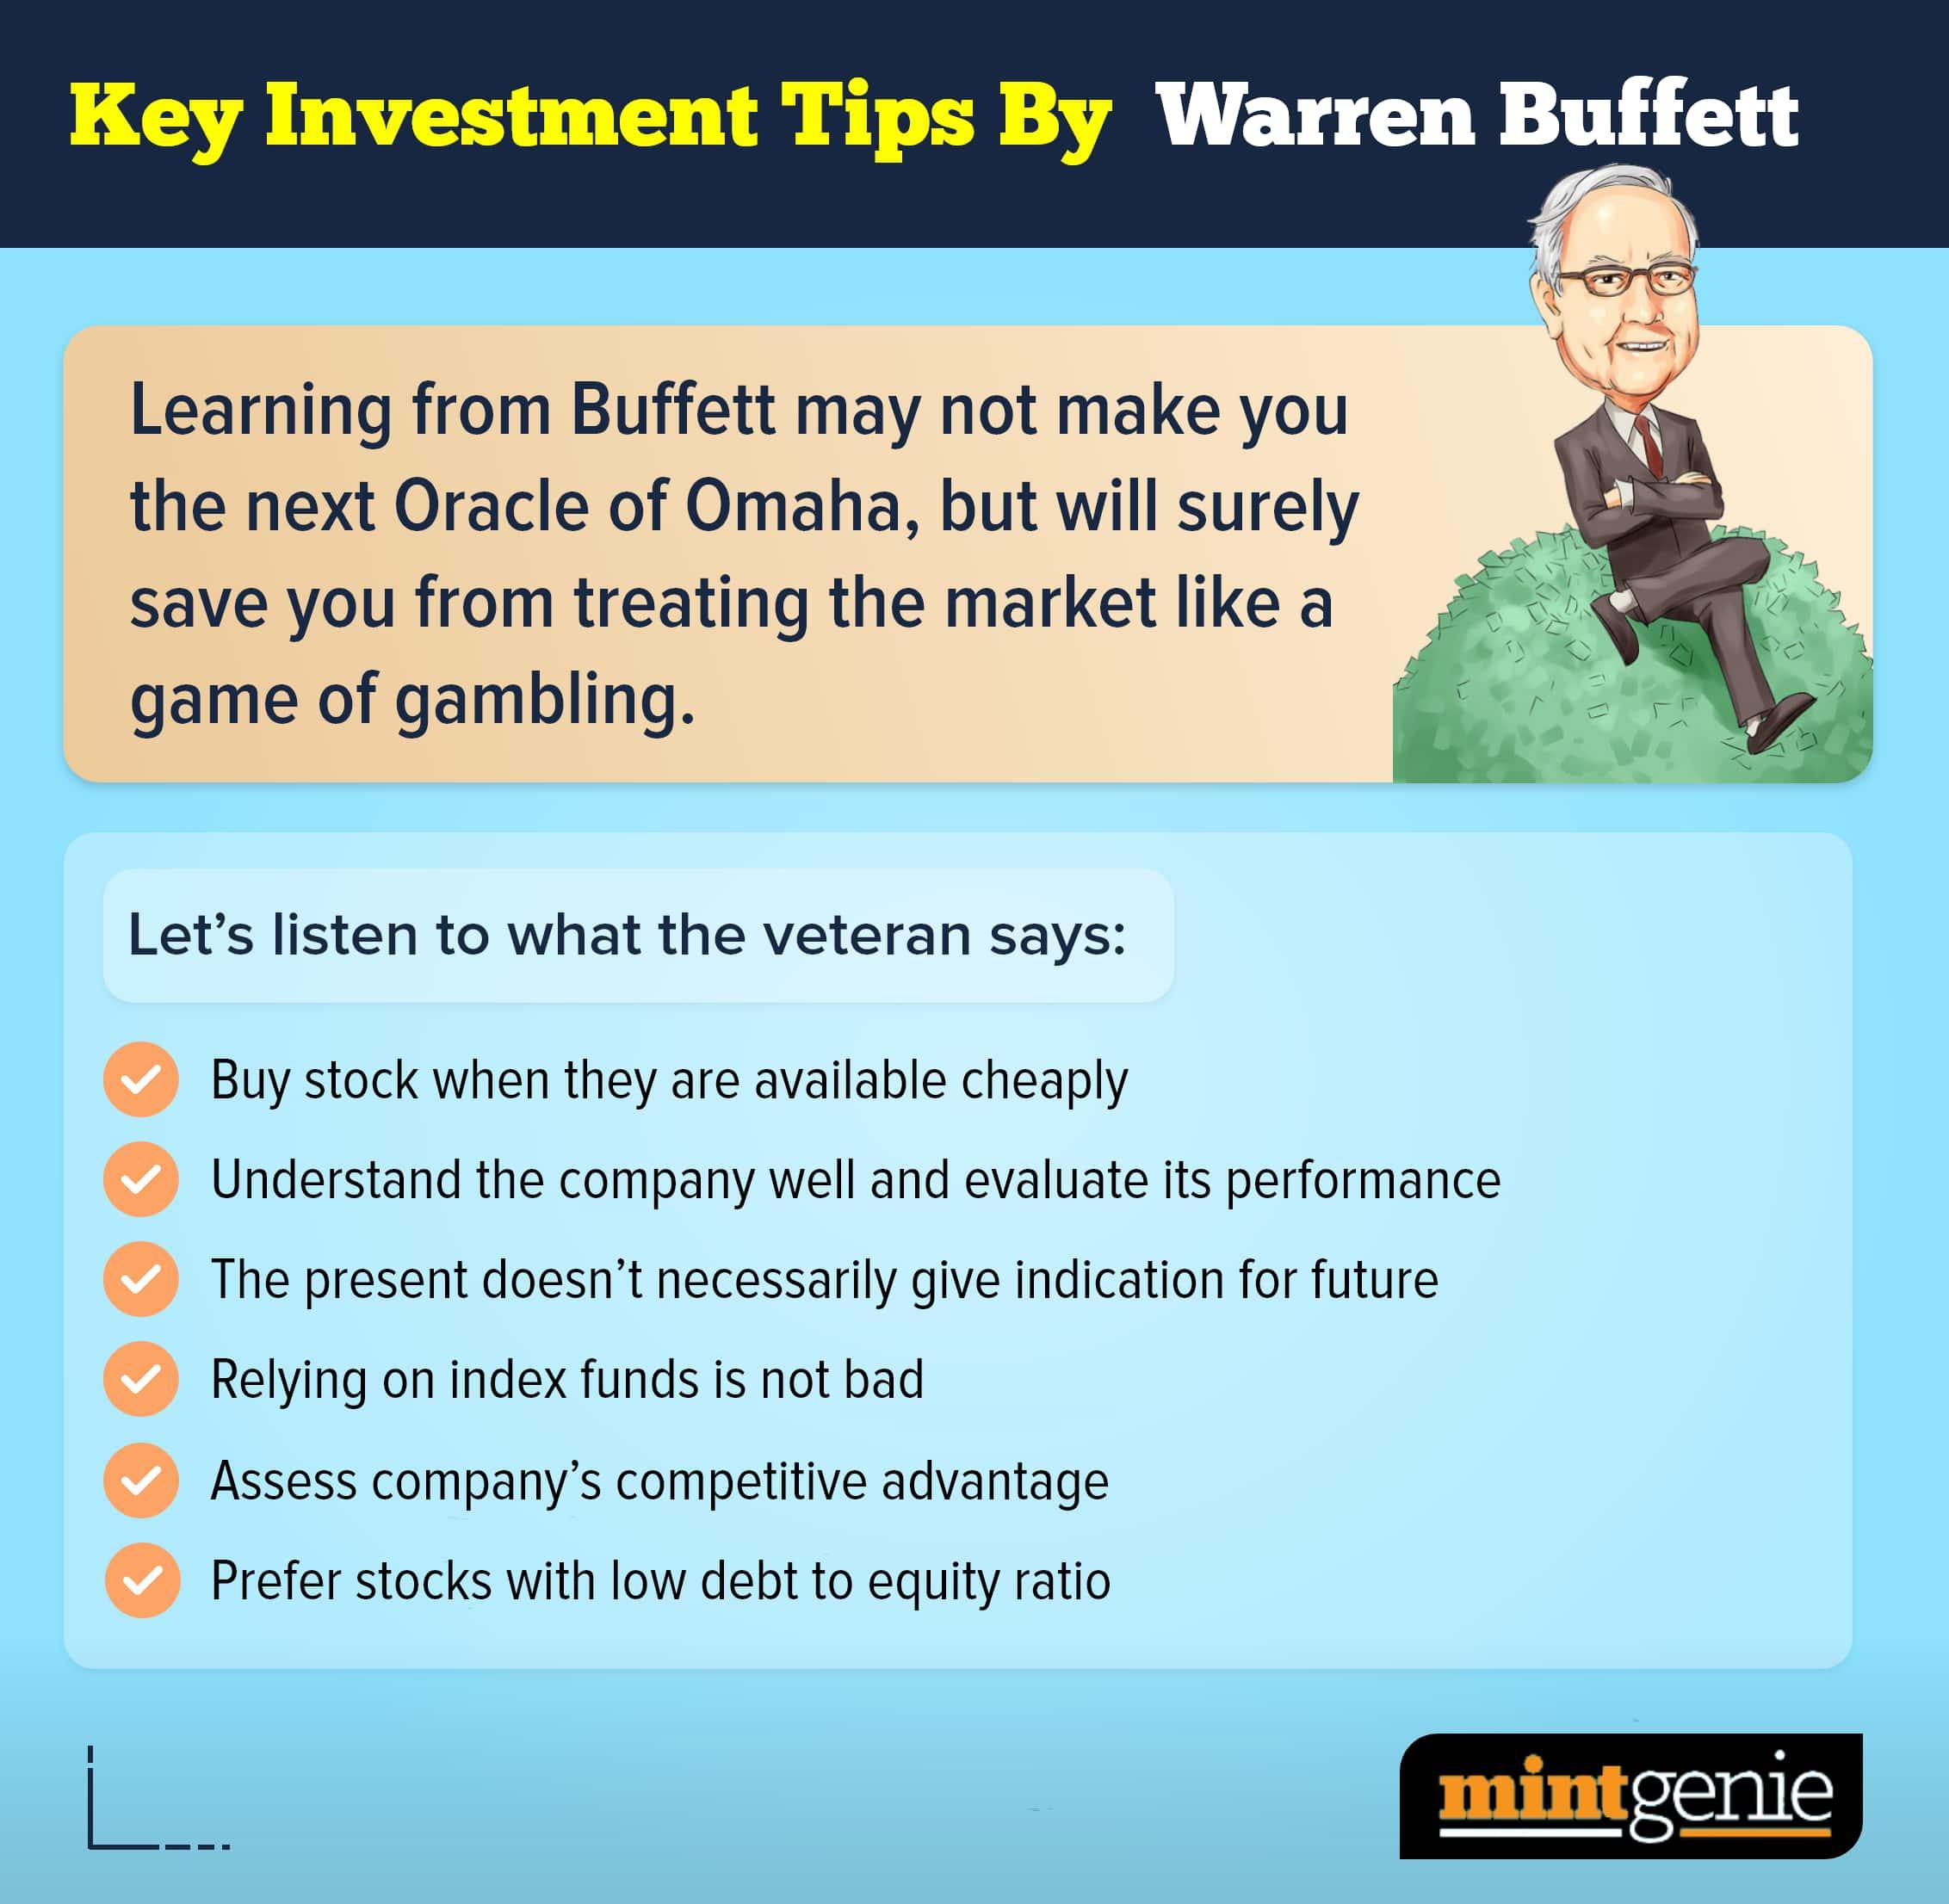 Warren Buffett says that investors should assess company's competitive advantage before investing into it.